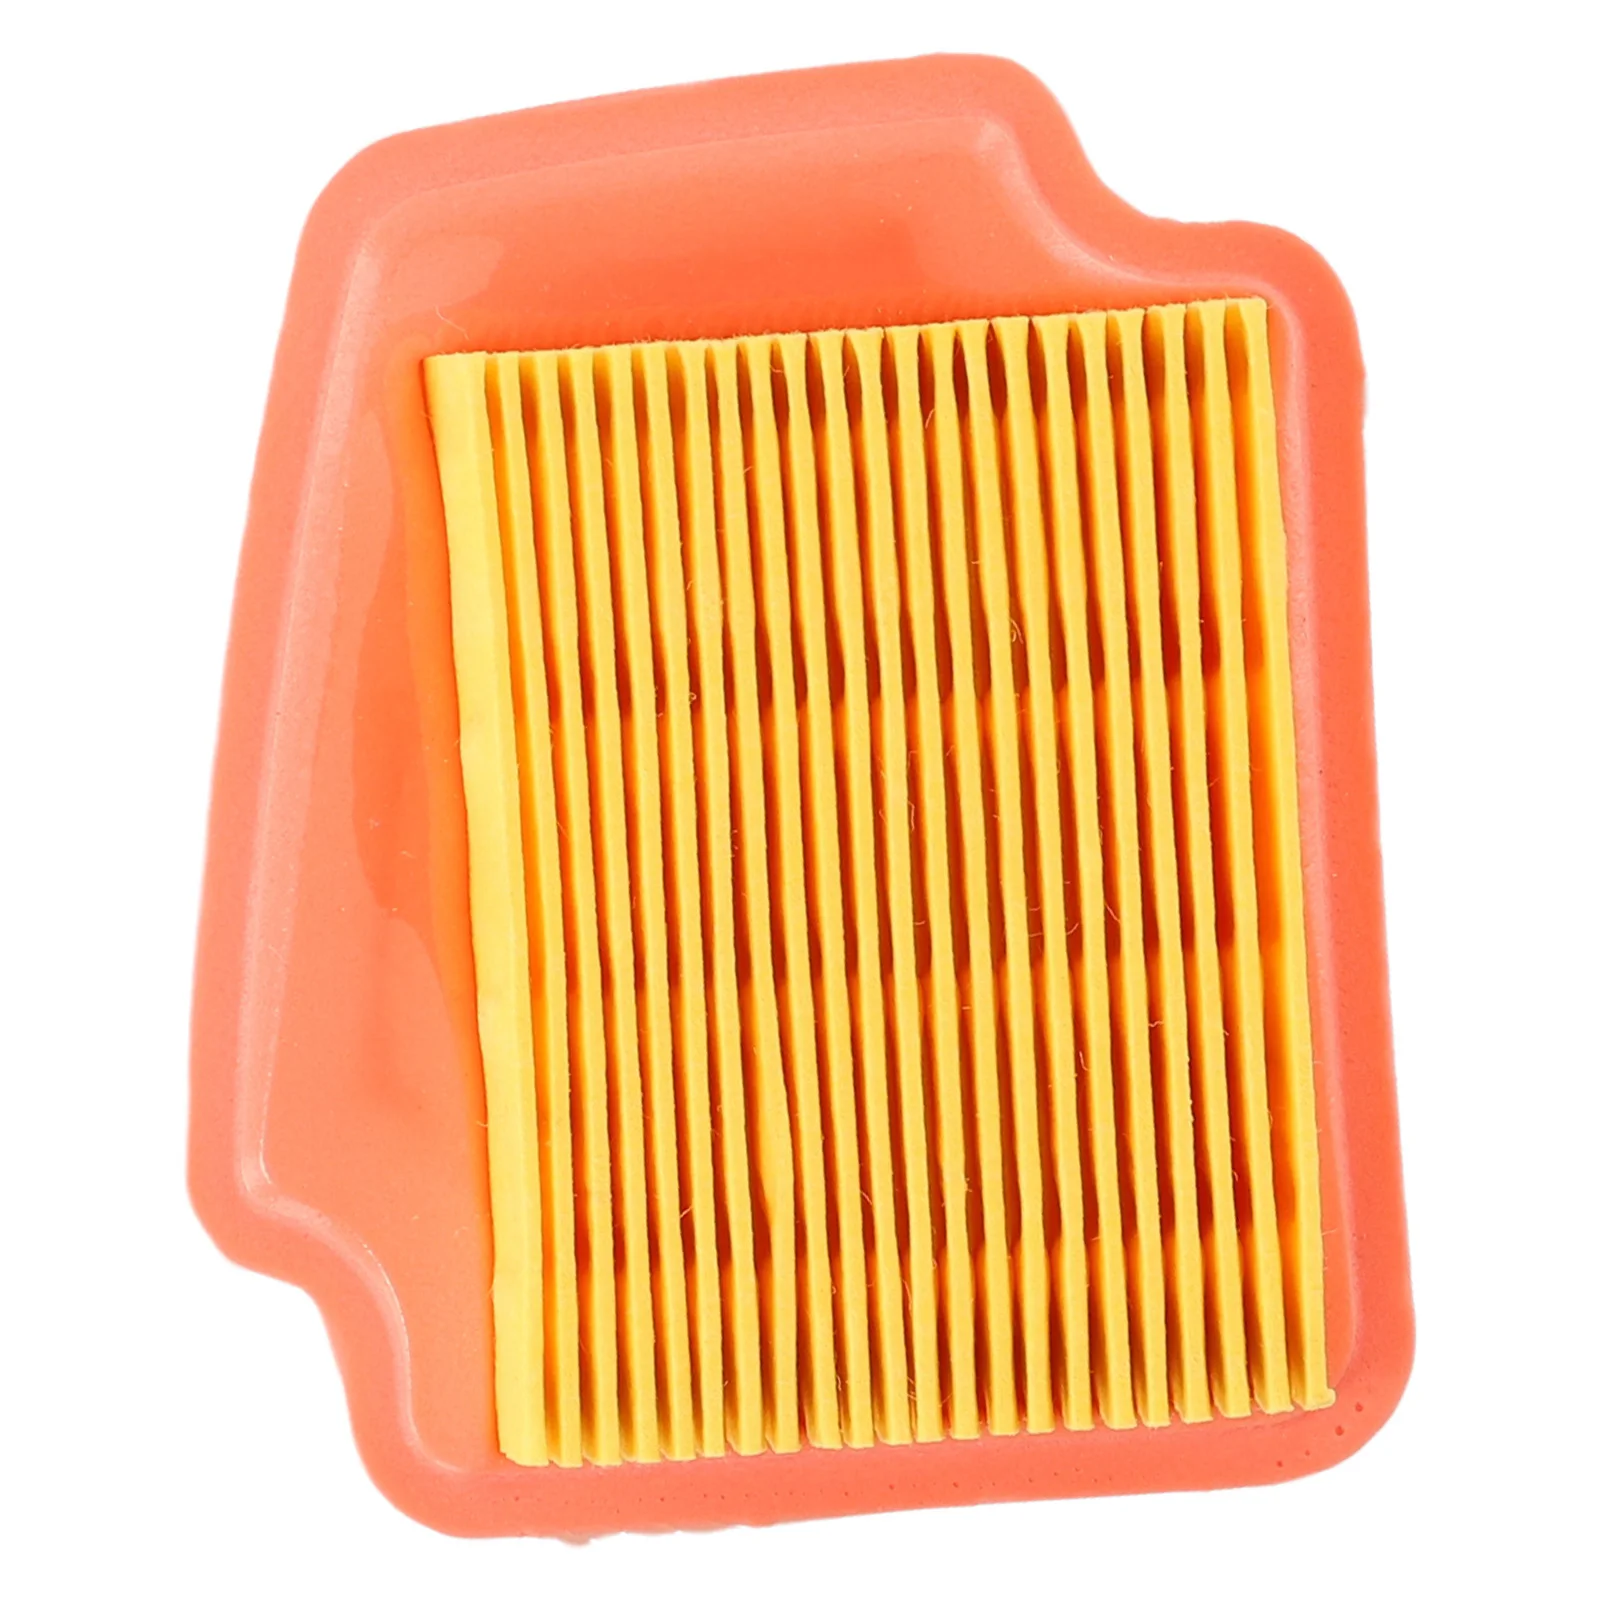 

Attachment Air Filter Trimmer Parts Garden Supplies KM94R KM94 KM94RC Lawn Mower Plastic Replacement For Stihl SP92C SP92TC